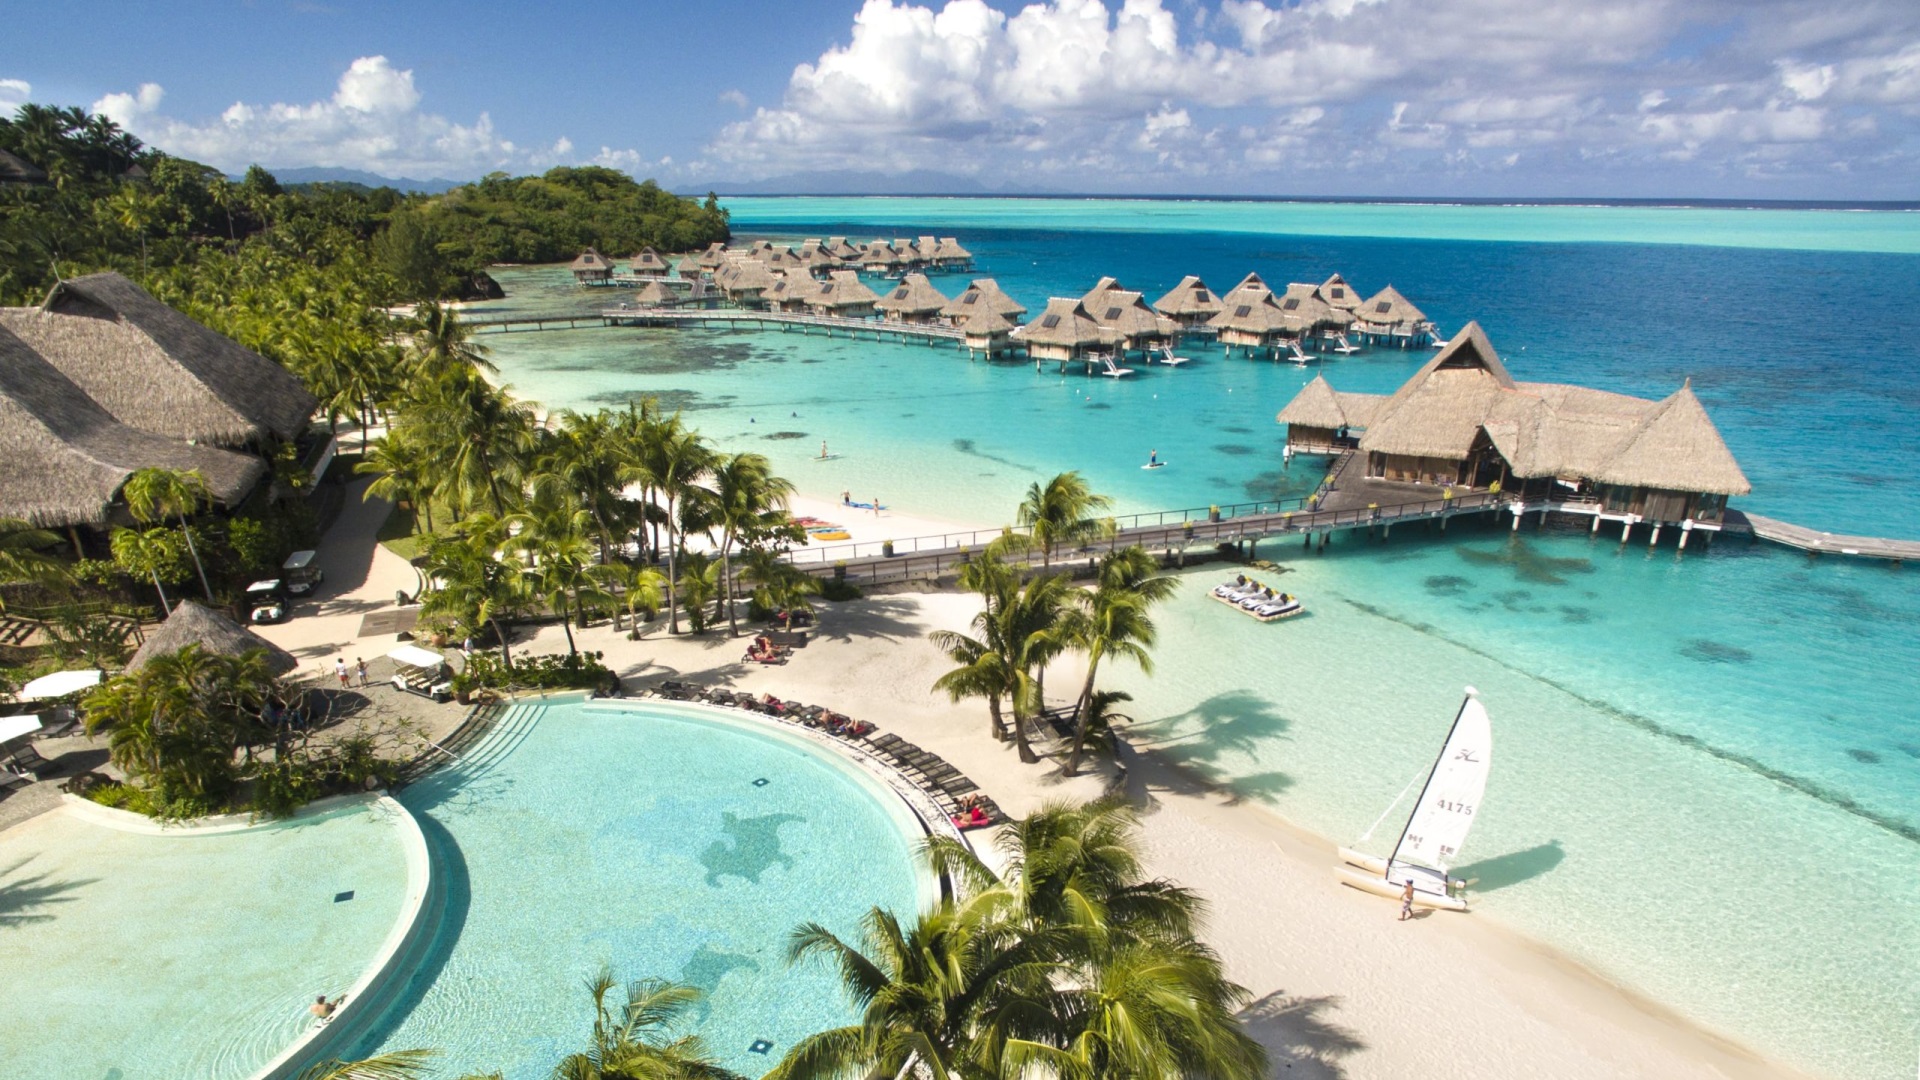 Experience tropical luxury in the heart of the South Pacific at Conrad Bora Bora Nui